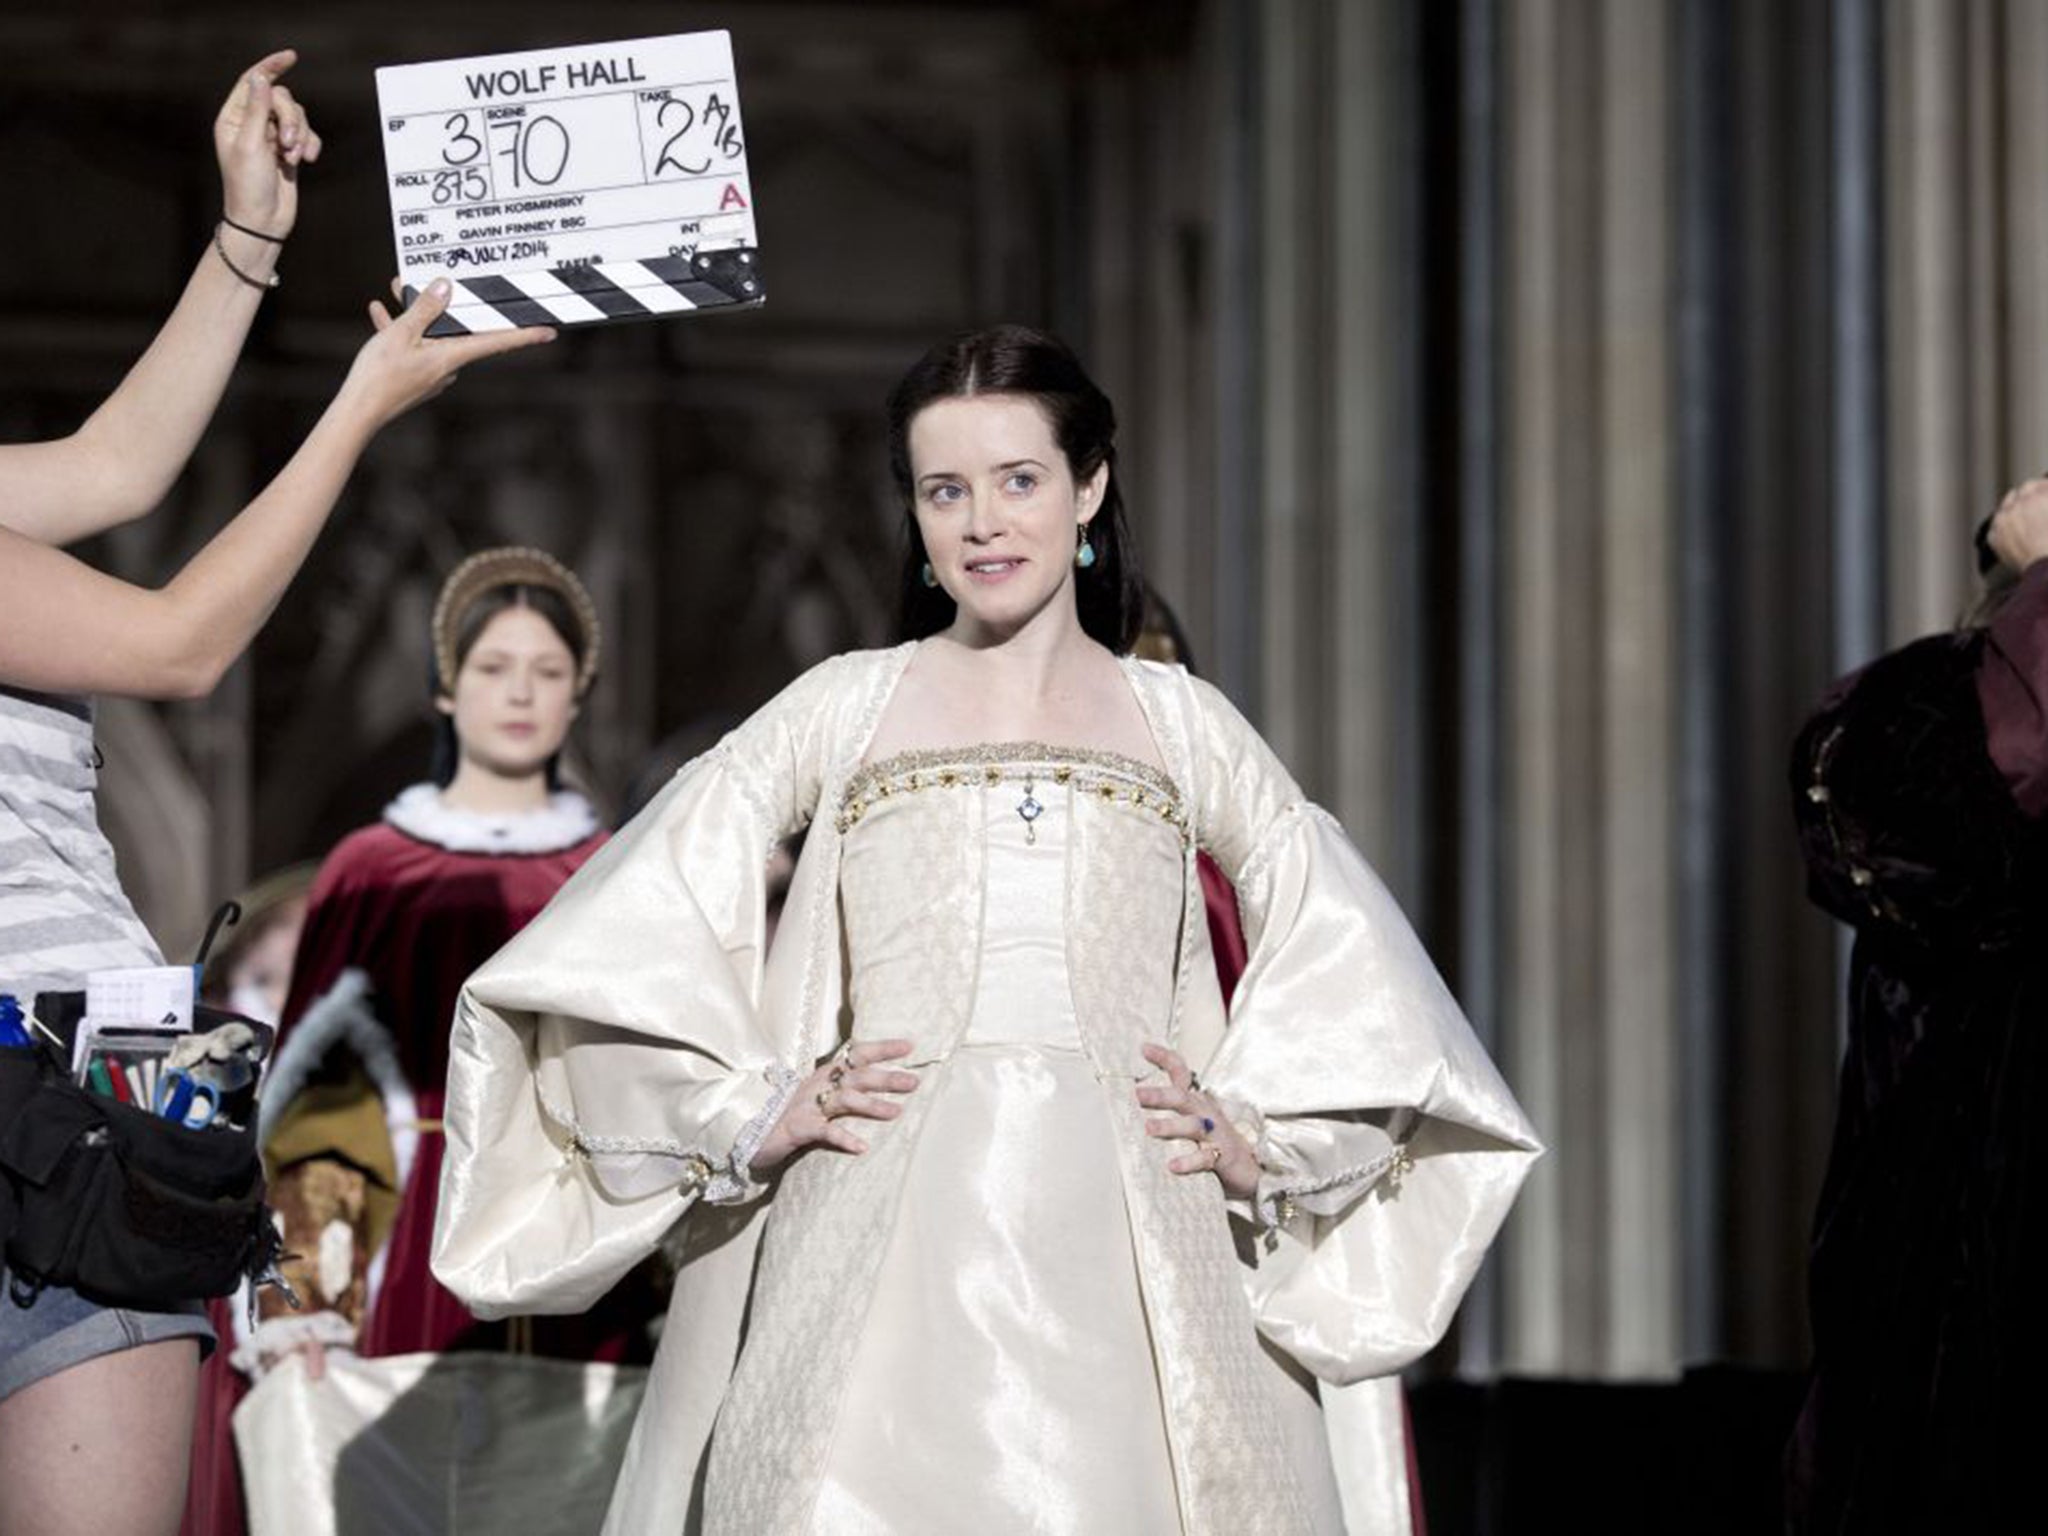 Claire Foy in Hilary Mantel's Wolf Hall; the author's novels are busy reinventing the Tudors for the 21st century (BBC)